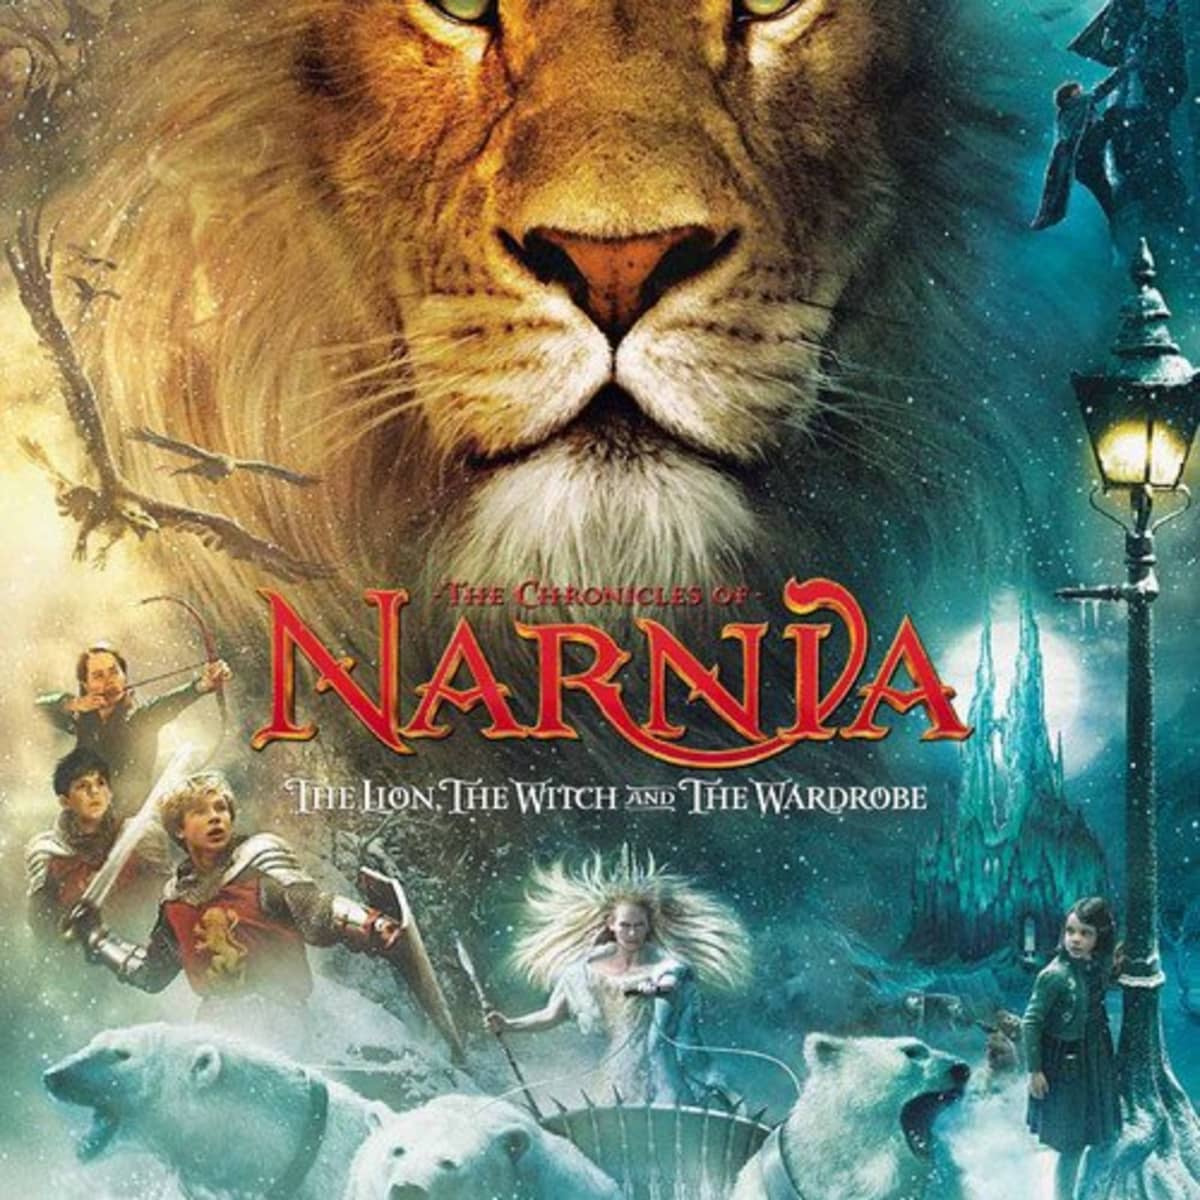 Are 'Harry Potter' and 'Chronicles of Narnia' Part of the Same World? -  Inside the Magic